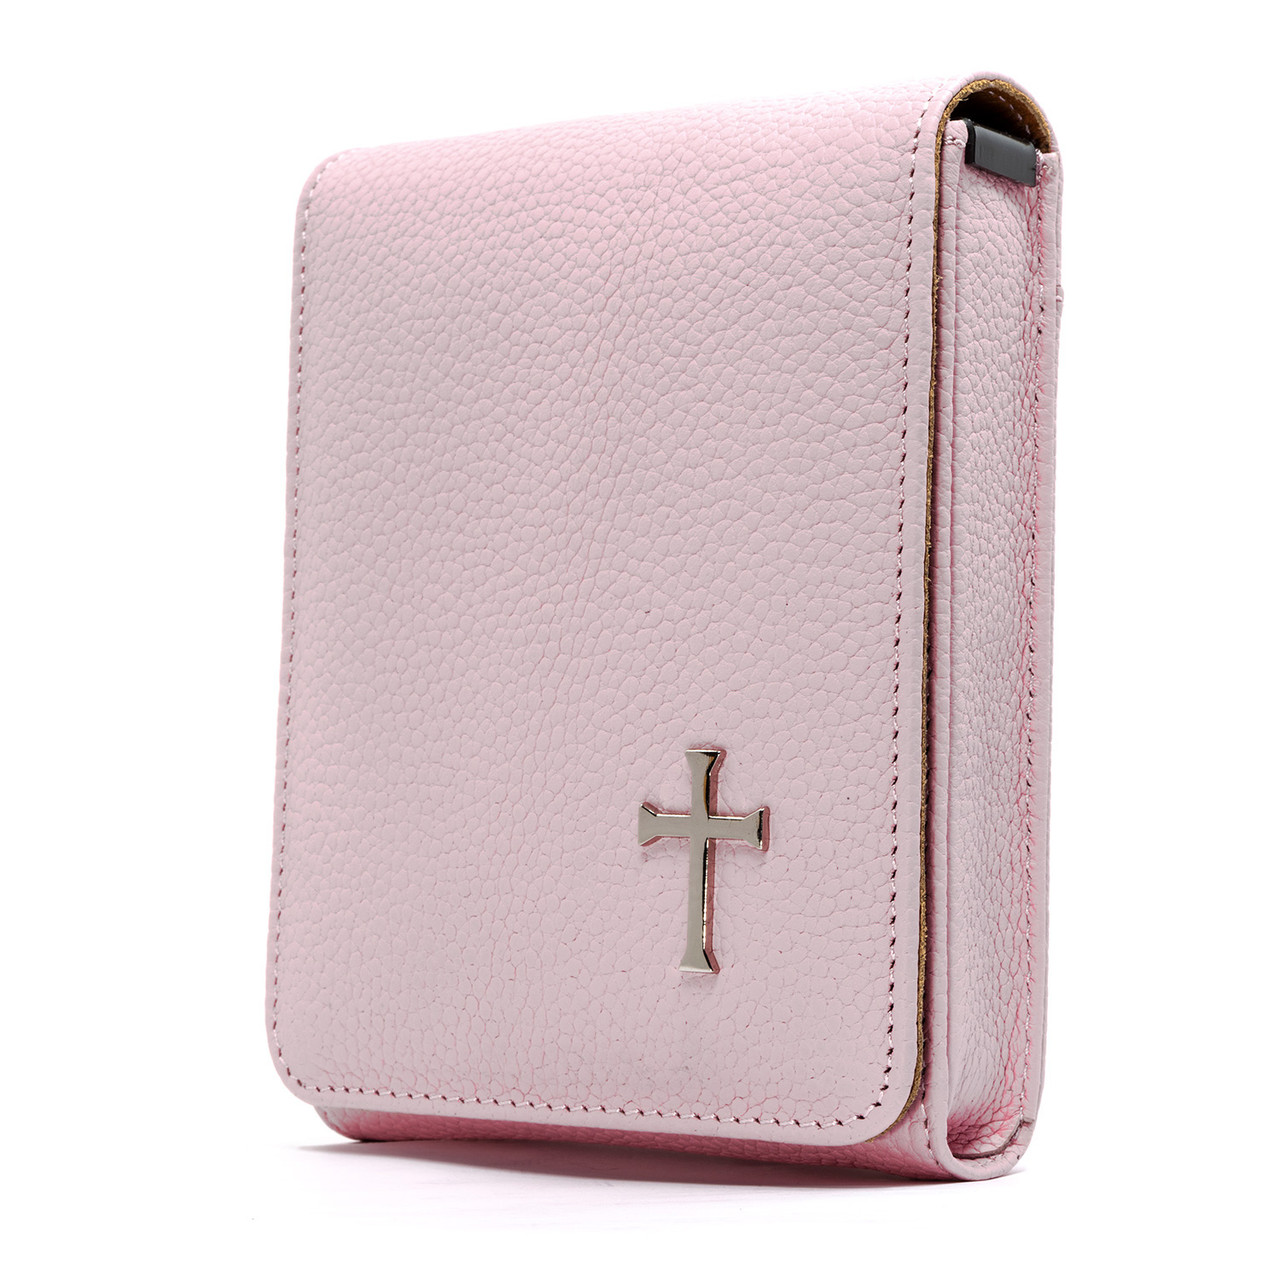 Pink Carry Faithfully Cross Holster for the Glock 31